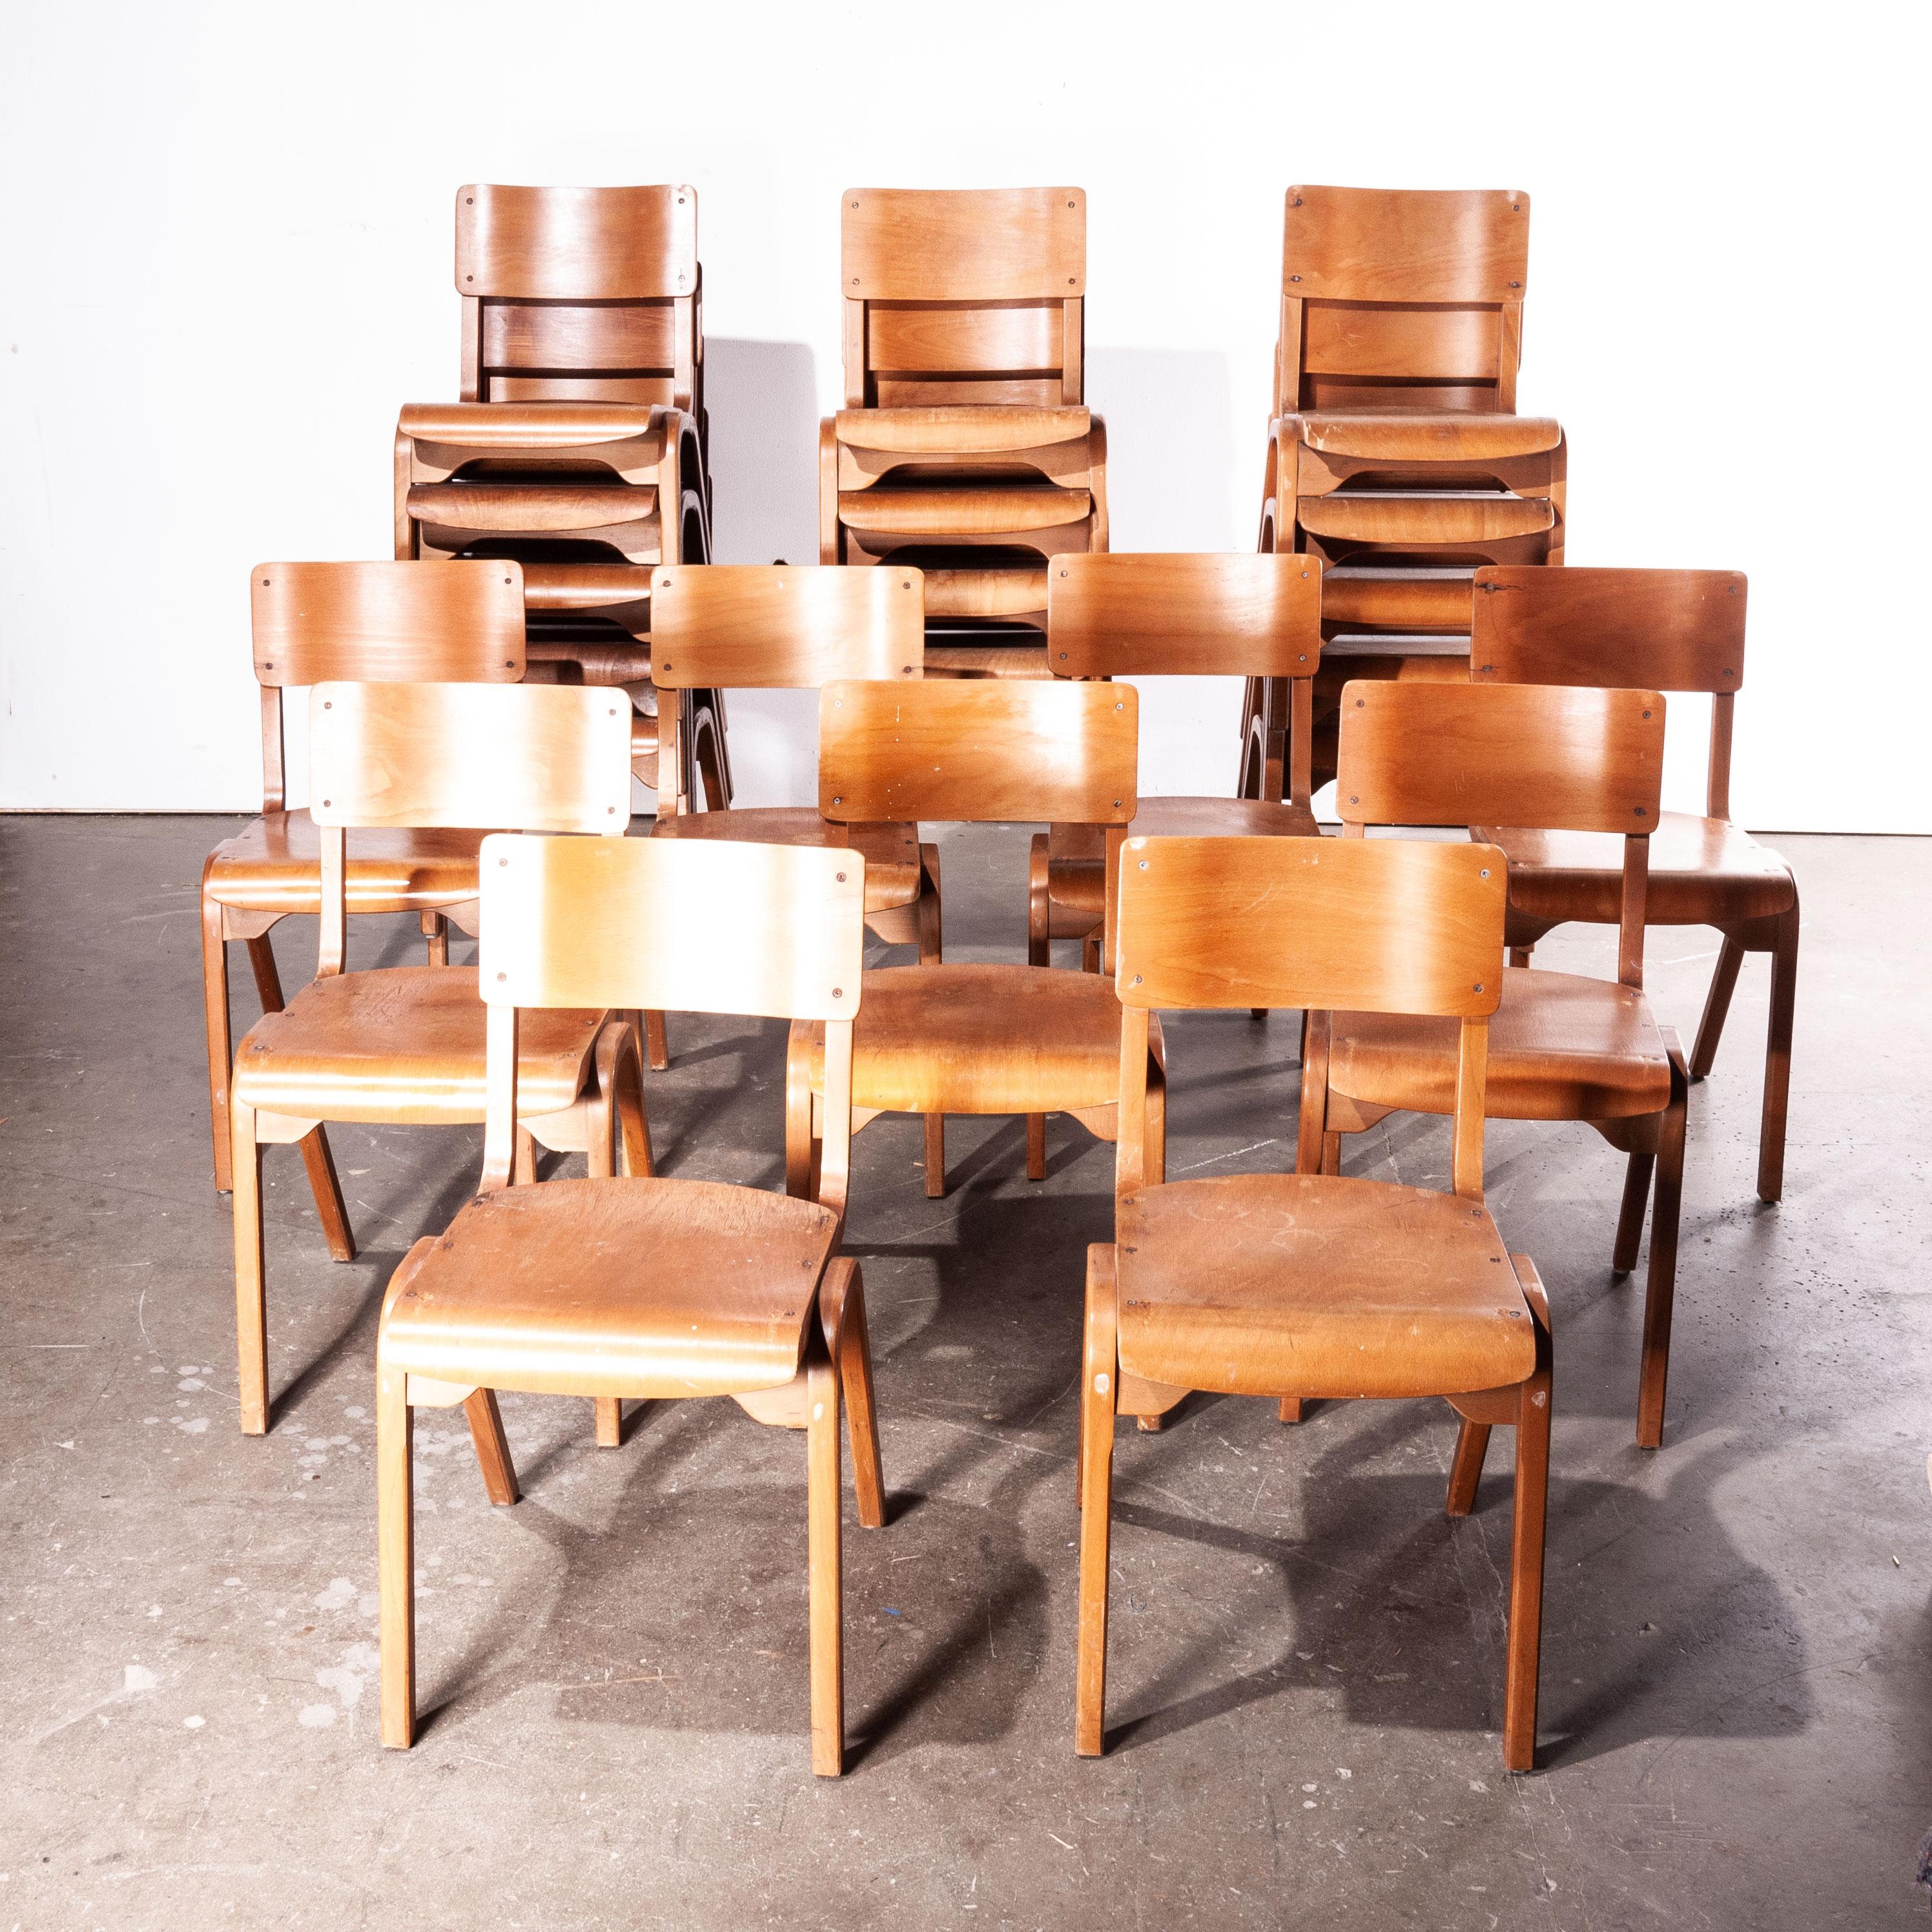 1950s stacking dining chairs by ESA James Leonard, Lamstak, set of twenty four, other quantities available

Set of twenty four 1950s rare vintage James Leonard ESA Esavian stacking dining chairs. This is one of our favourite models of chairs.